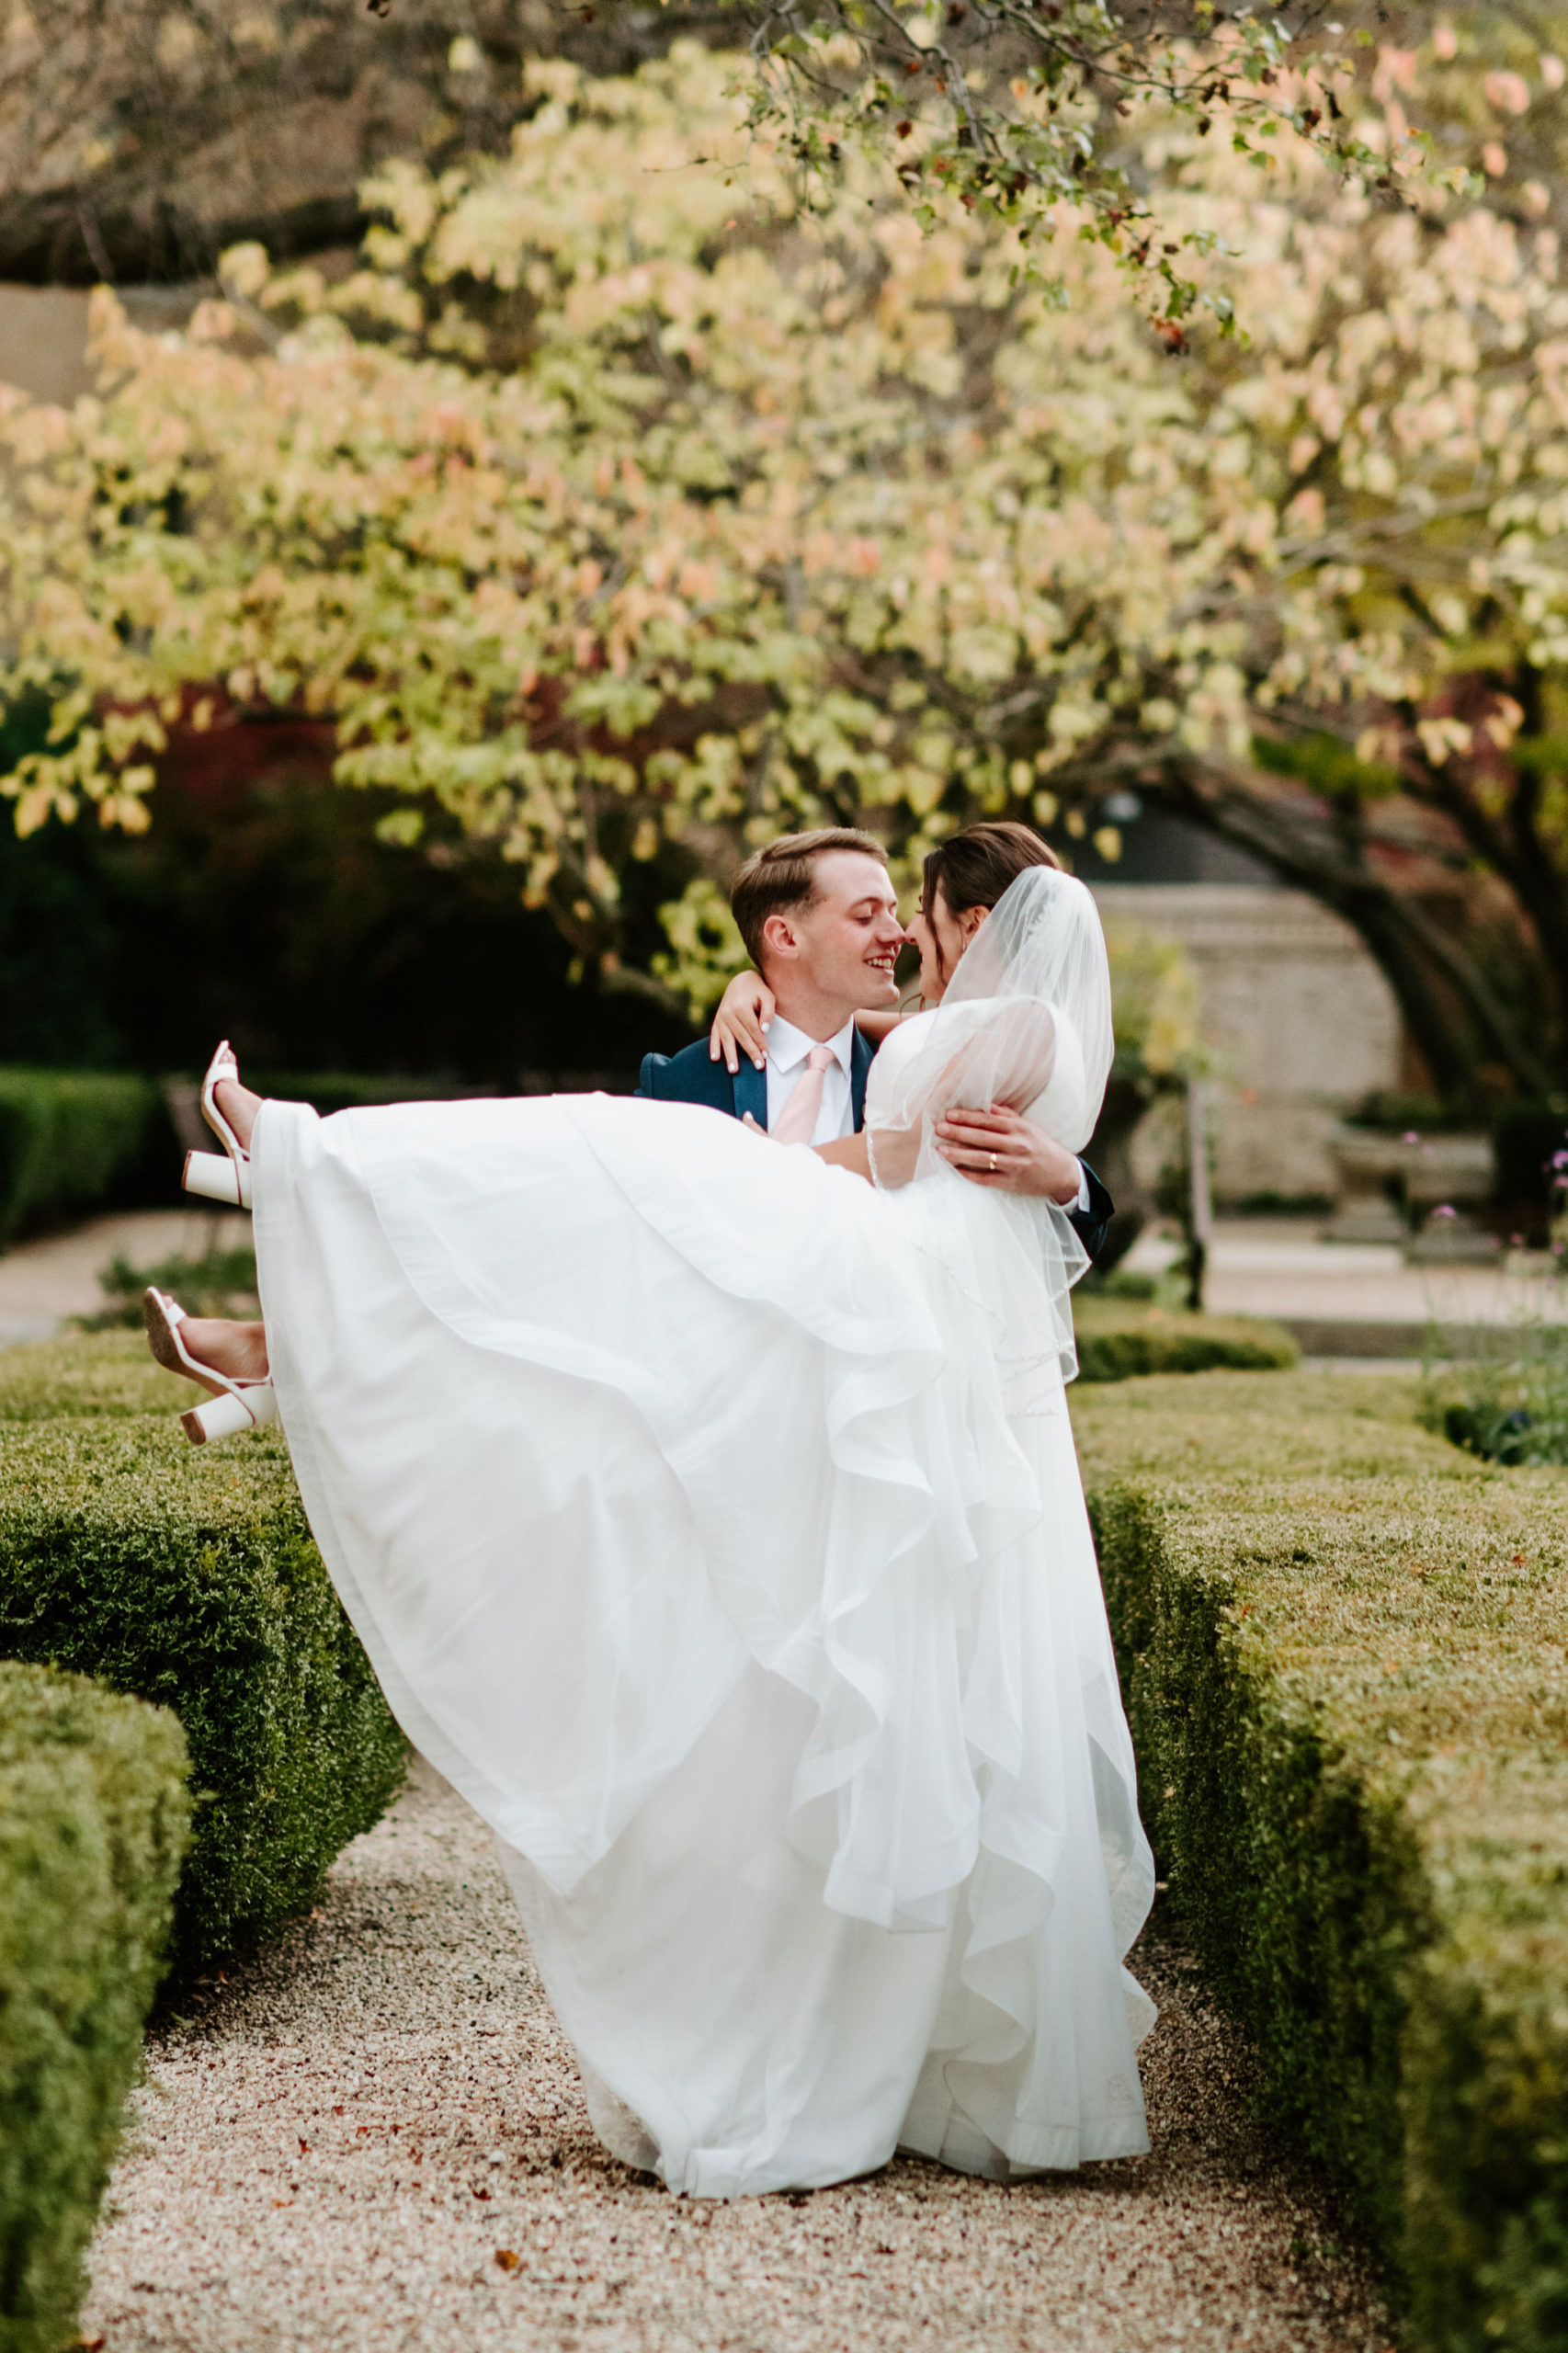 A Perfect St. Charles Hotel Baker Wedding | Photographs by Teresa. Includes bridal fashion, wedding inspiration and wedding details. Book your Chicago wedding and browse the blog for more inspiration